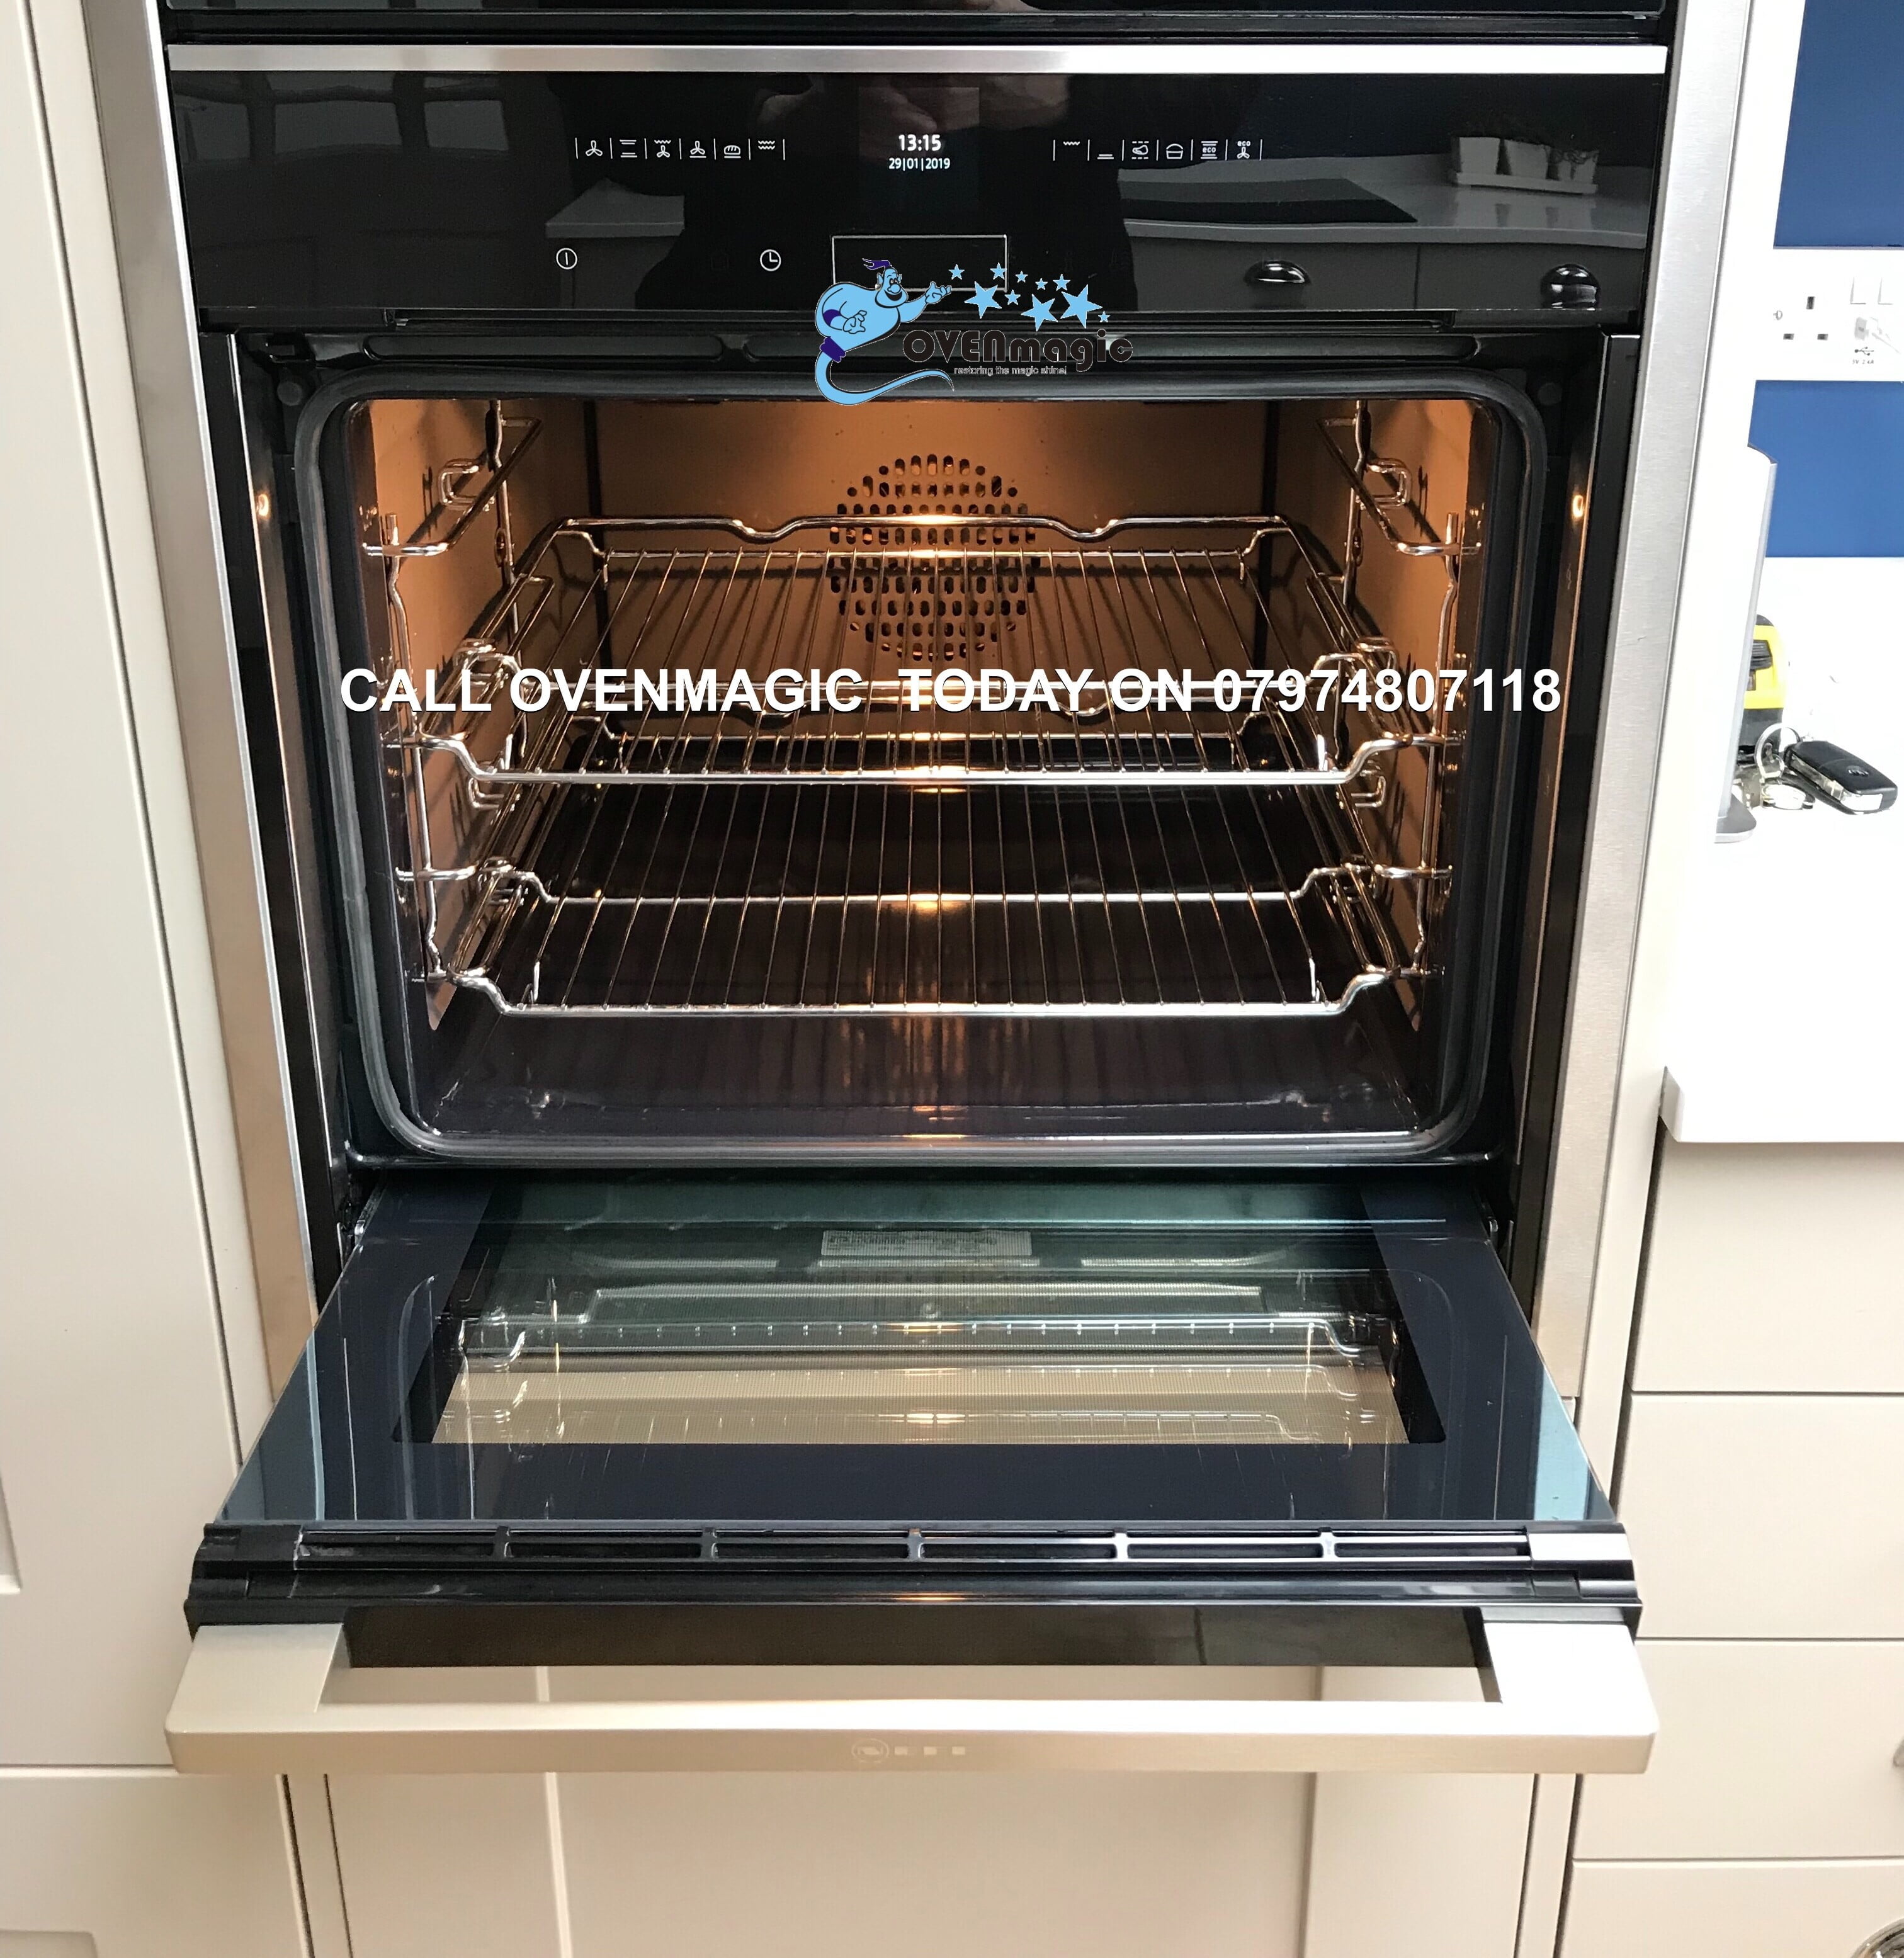 Neff Slide And Hide Oven Clean By Ovenmagic